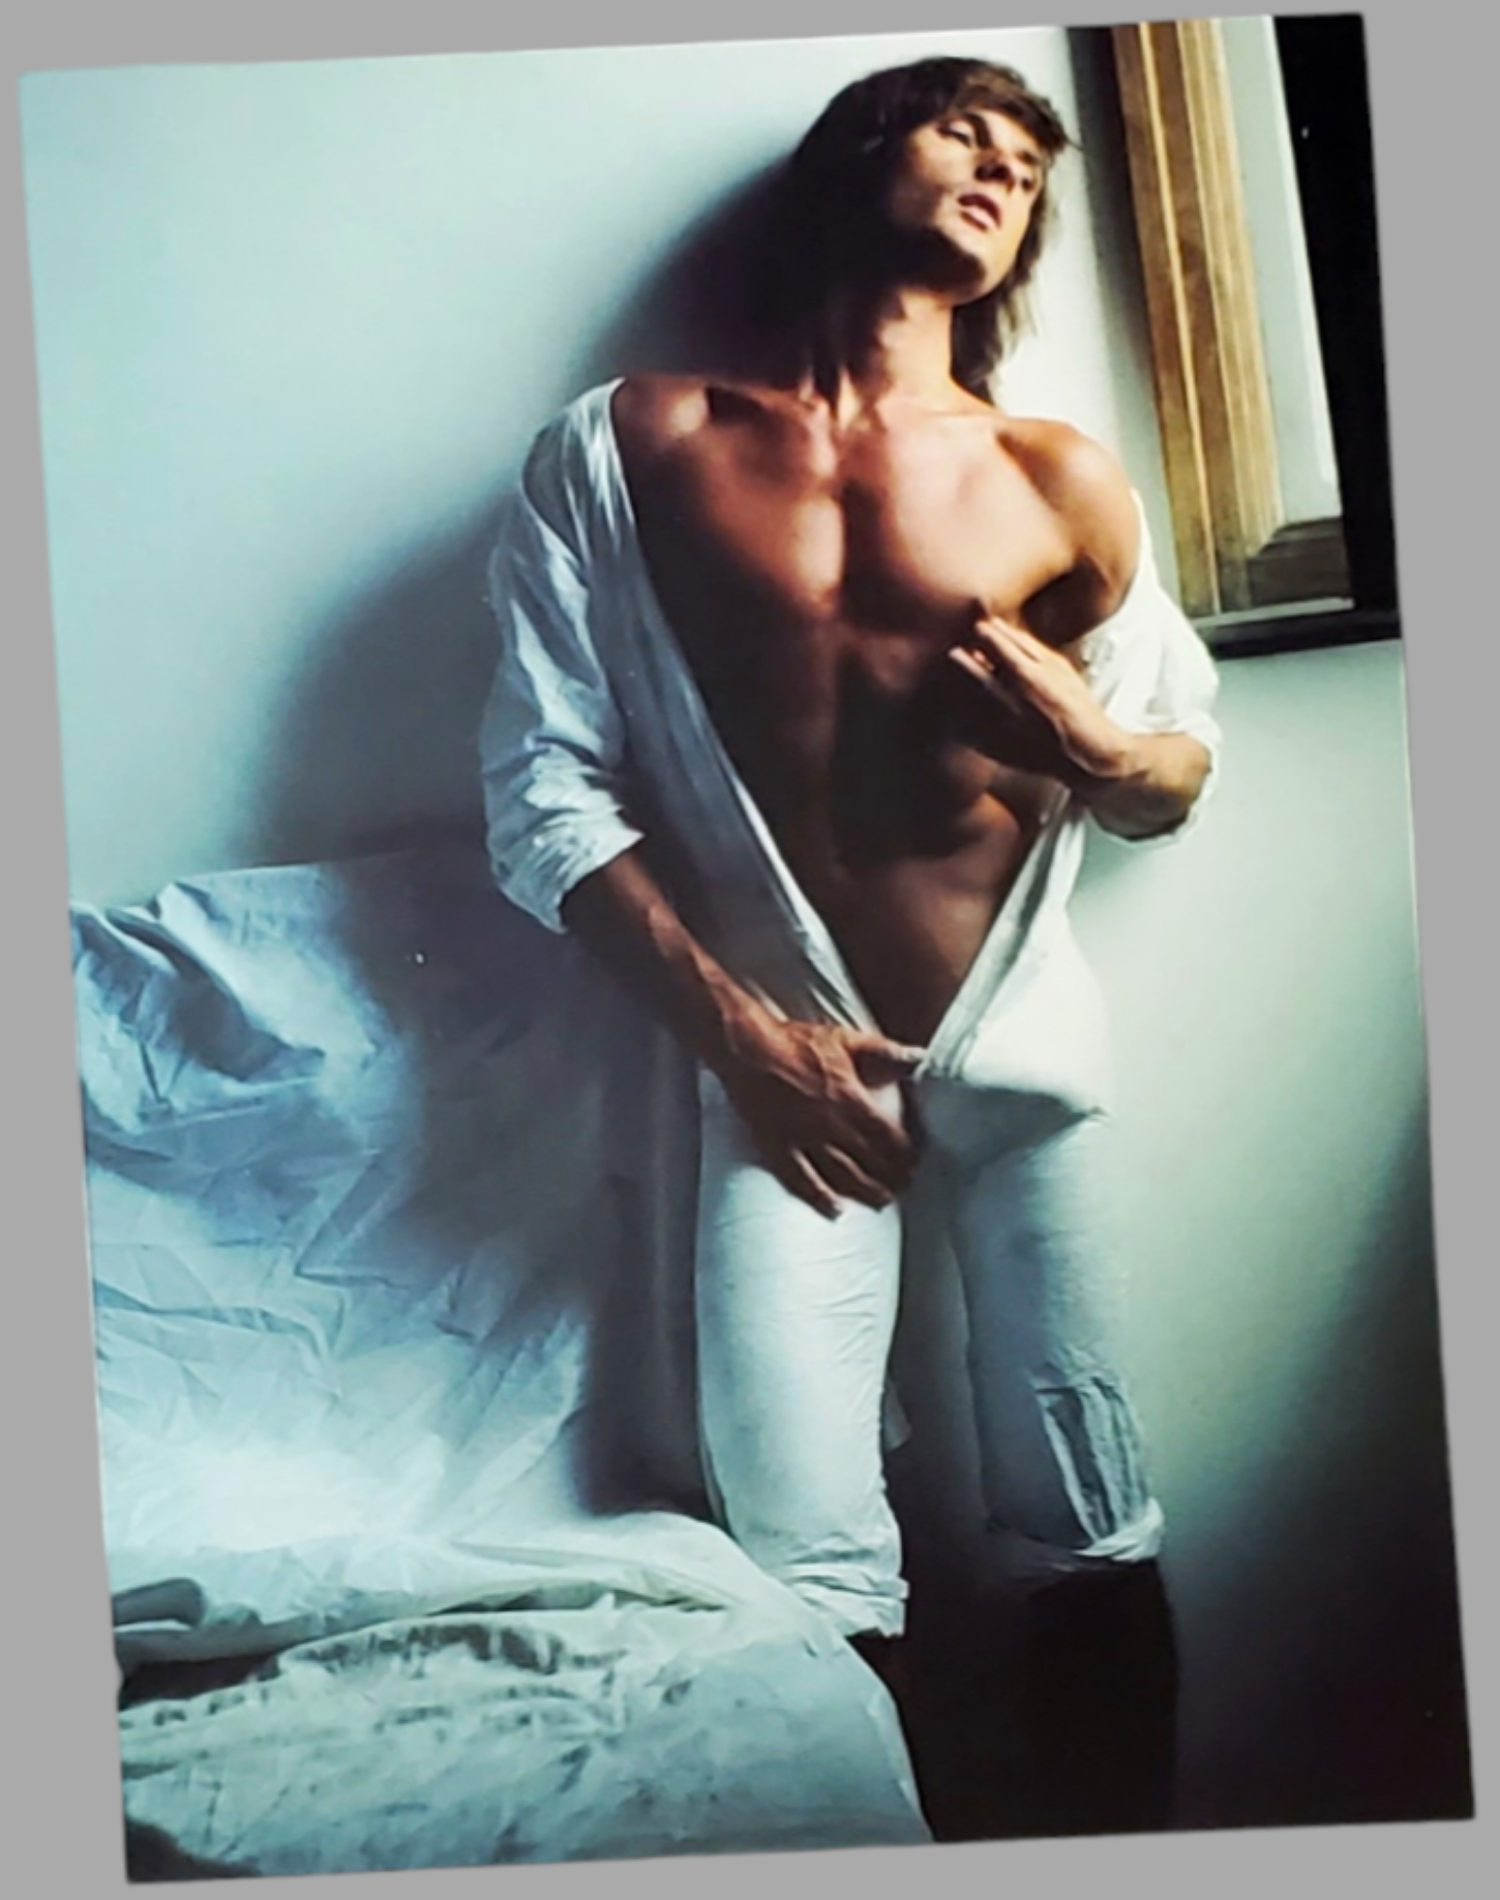 Authentic Peter Berlin Semi Nude Erotic Photo For Sale In AREA51GALLERY New Orleans A gay owned small business 